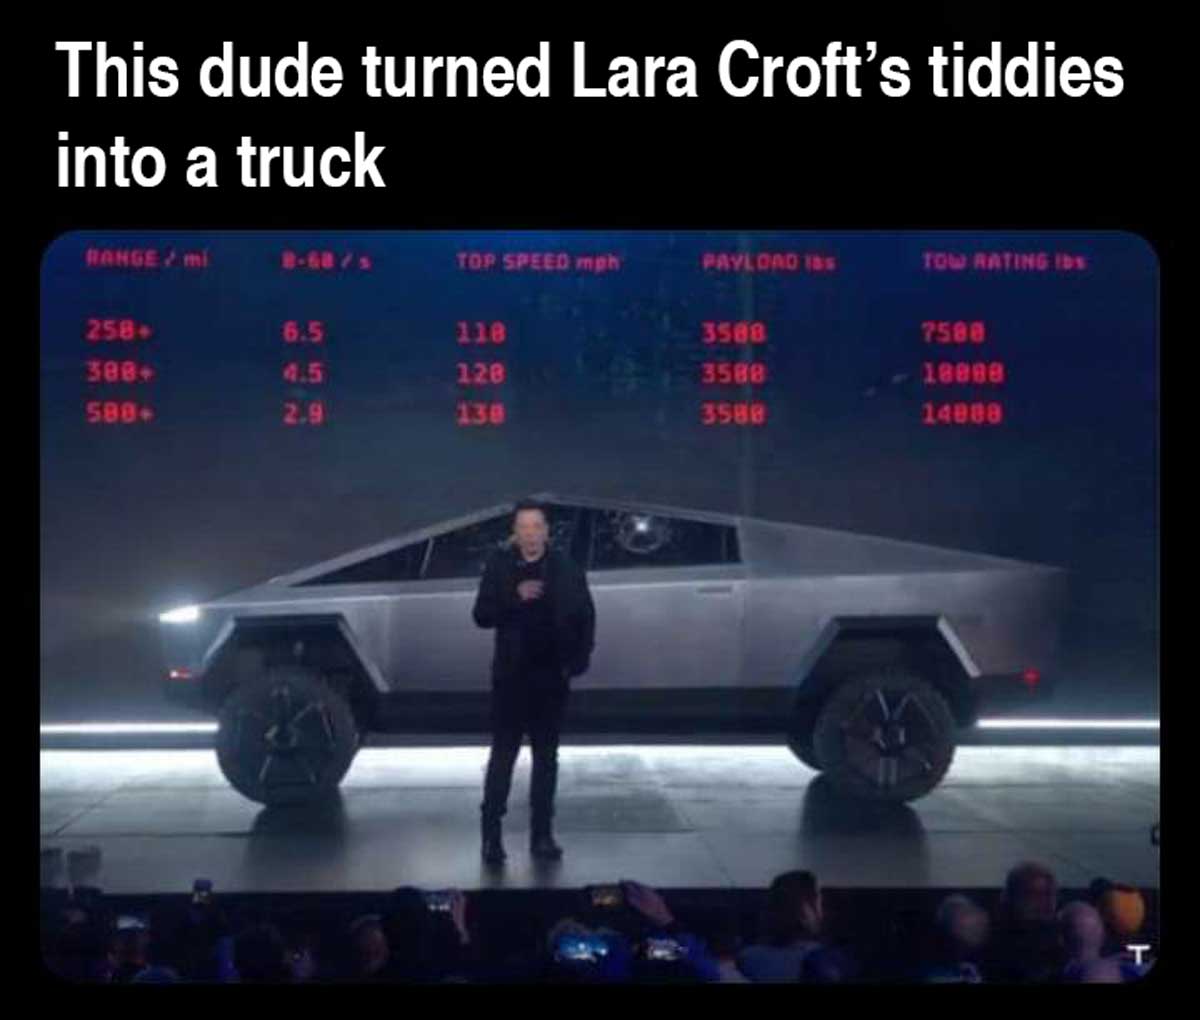 sports car - This dude turned Lara Croft's tiddies into a truck Range Top Speed mph Payloads Tow Ratingids 258. 128 128 3588 3588 3588 7588 1809 14088 580.